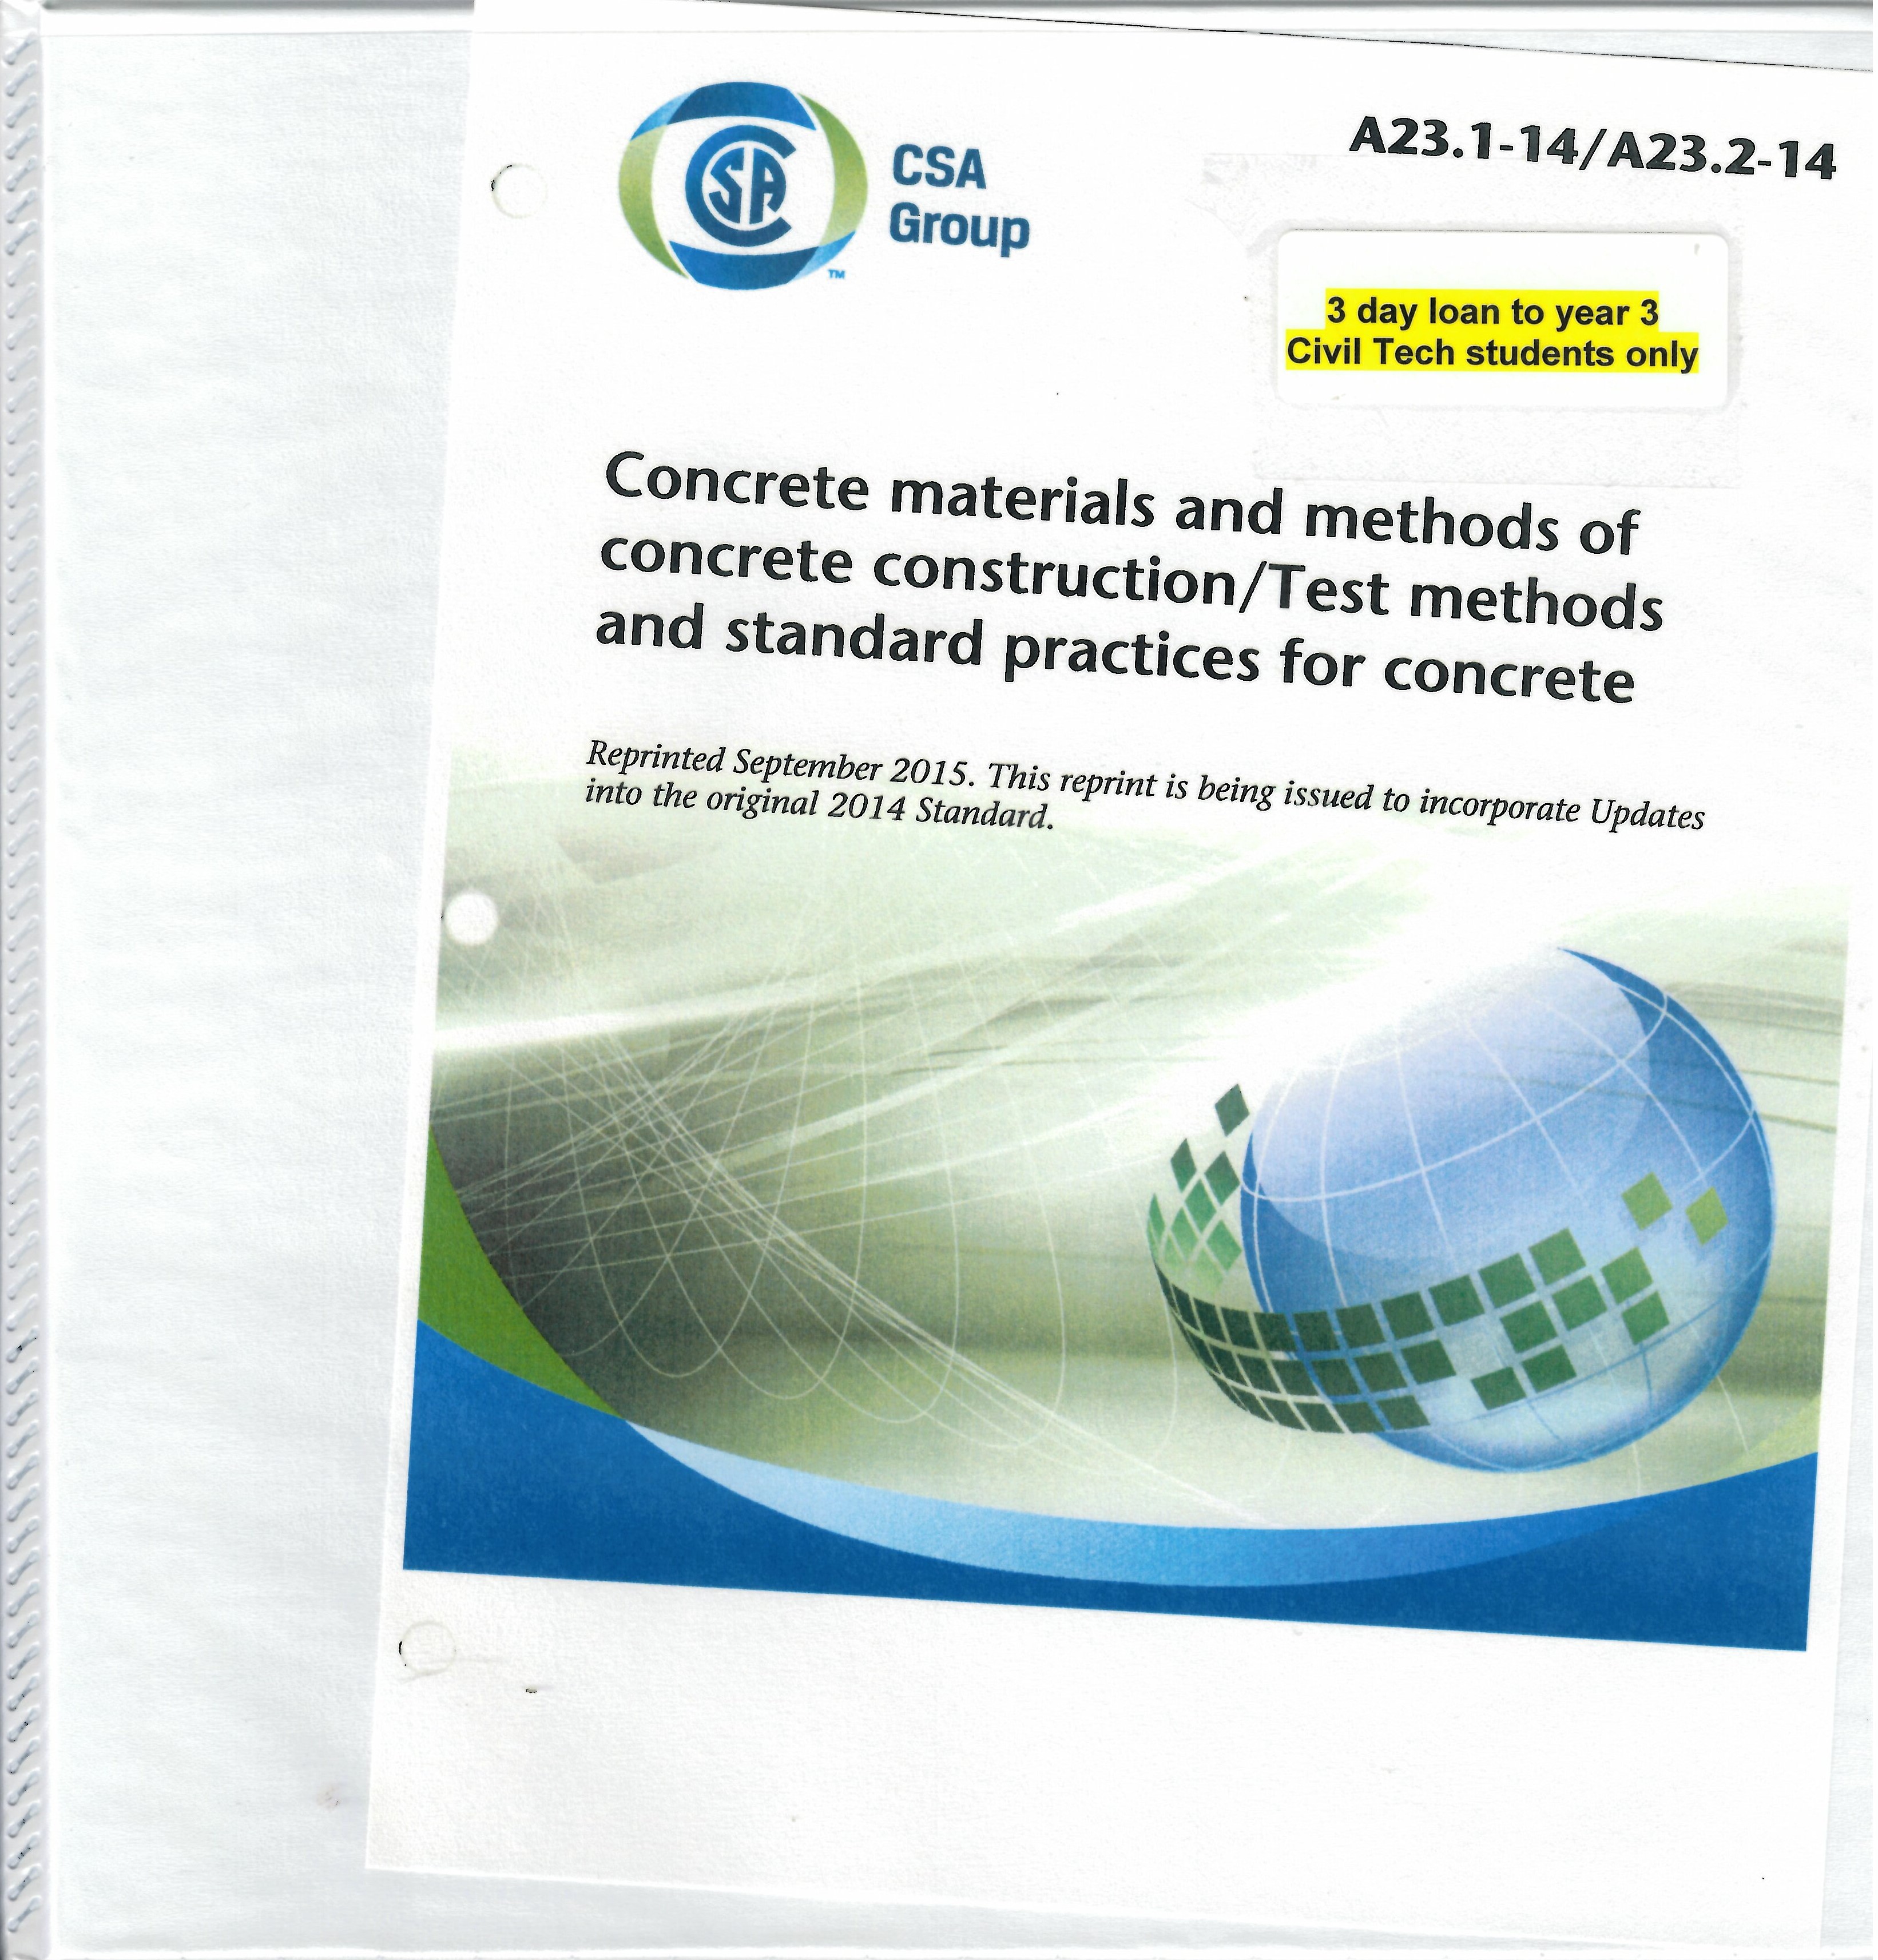 Concrete materials and methods of concrete construction : test methods and standard practices for concrete